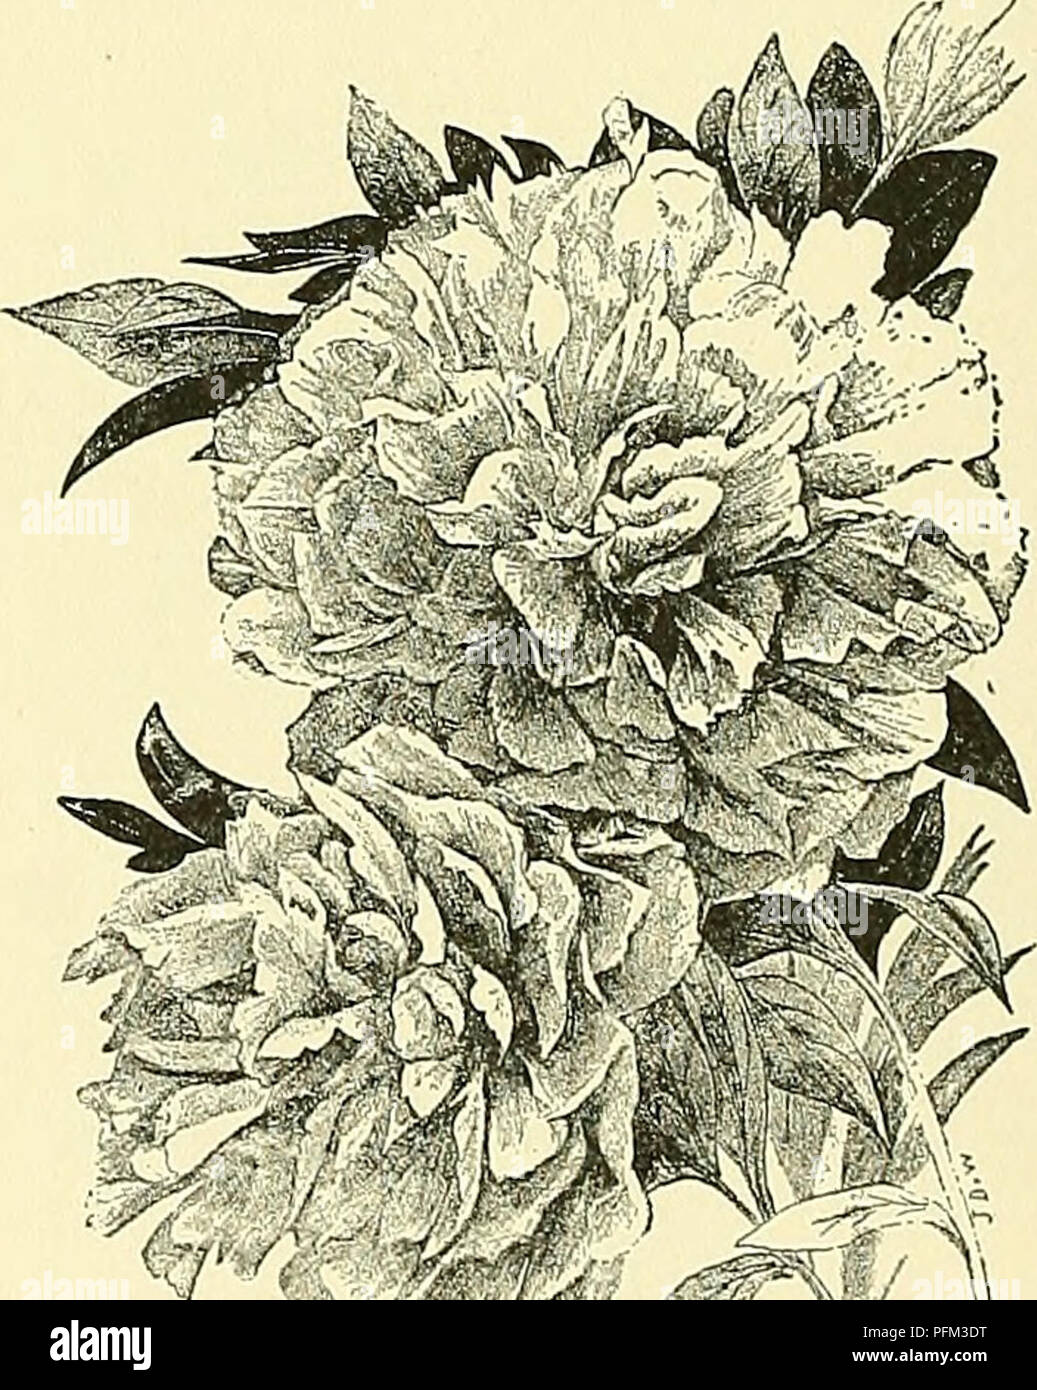 . Cyclopedia of American horticulture, comprising suggestions for cultivation of horticultural plants, descriptions of the species of fruits, vegetables, flowers, and ornamental plants sold in the United States and Canada, together with geographical and biographical sketches. Gardening. 1190 P^ONIA P^ONIA. alba-plena, 6. albiflora, S. amaranlhescens, 8. Audersonii, 10. anemoneflora, 6. anomala,, 5. arborea, 1. arietina, 10. atronibens, G. Banksli, 1. Baxteri, 10. blanda, C. Blushing Maid, 8. Brilliant, 8. Brownii, 2. Byzantina, 8. Califomica, 2. Chinensis, 3. compacta, 8. Cretica, 10. Crown Pr Stock Photo